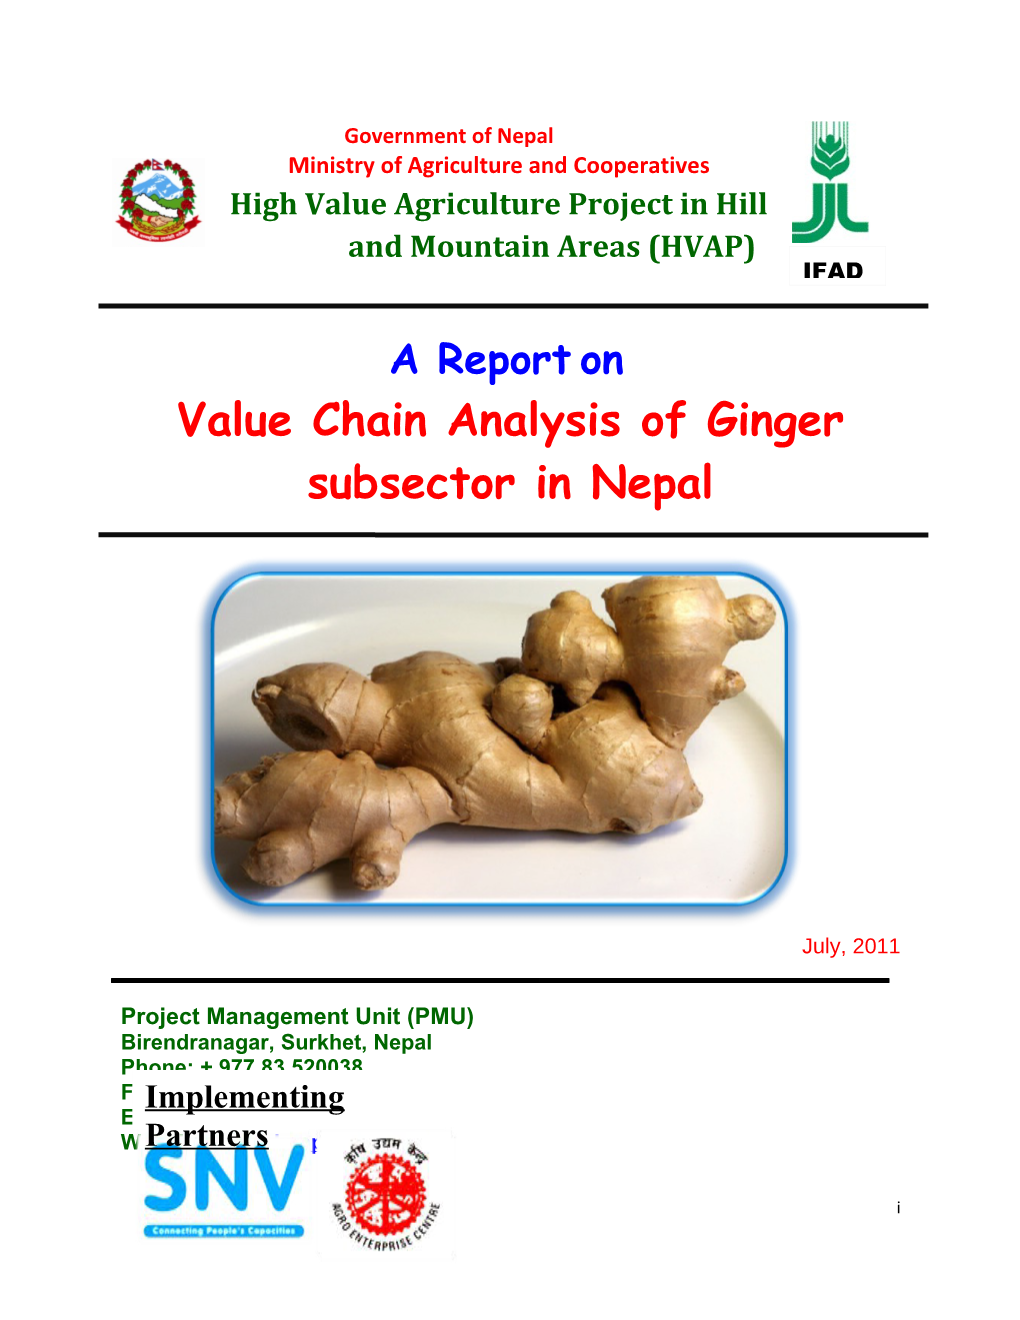 Value Chain Analysis of Ginger Subsector in Nepal